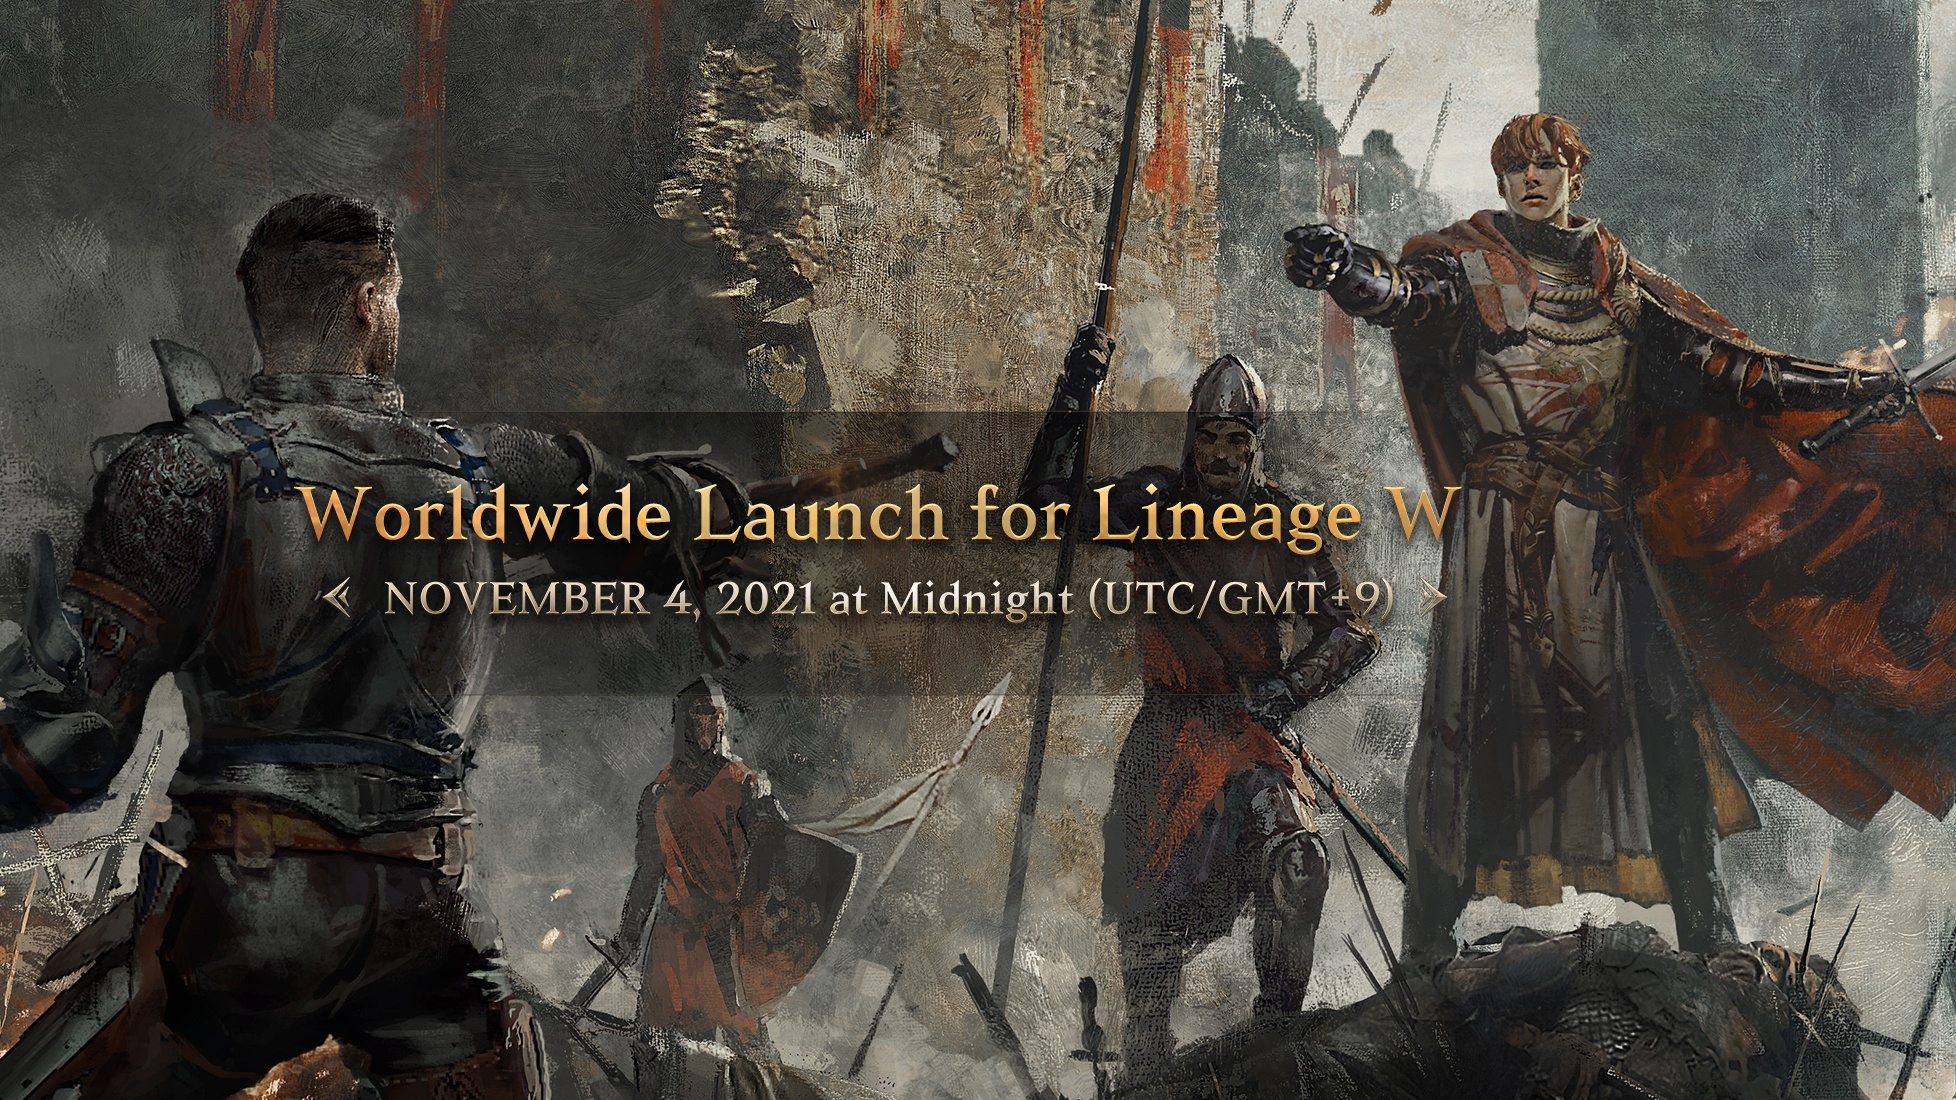 NCSOFT’s Lineage W Soon To Globally Release On November 4